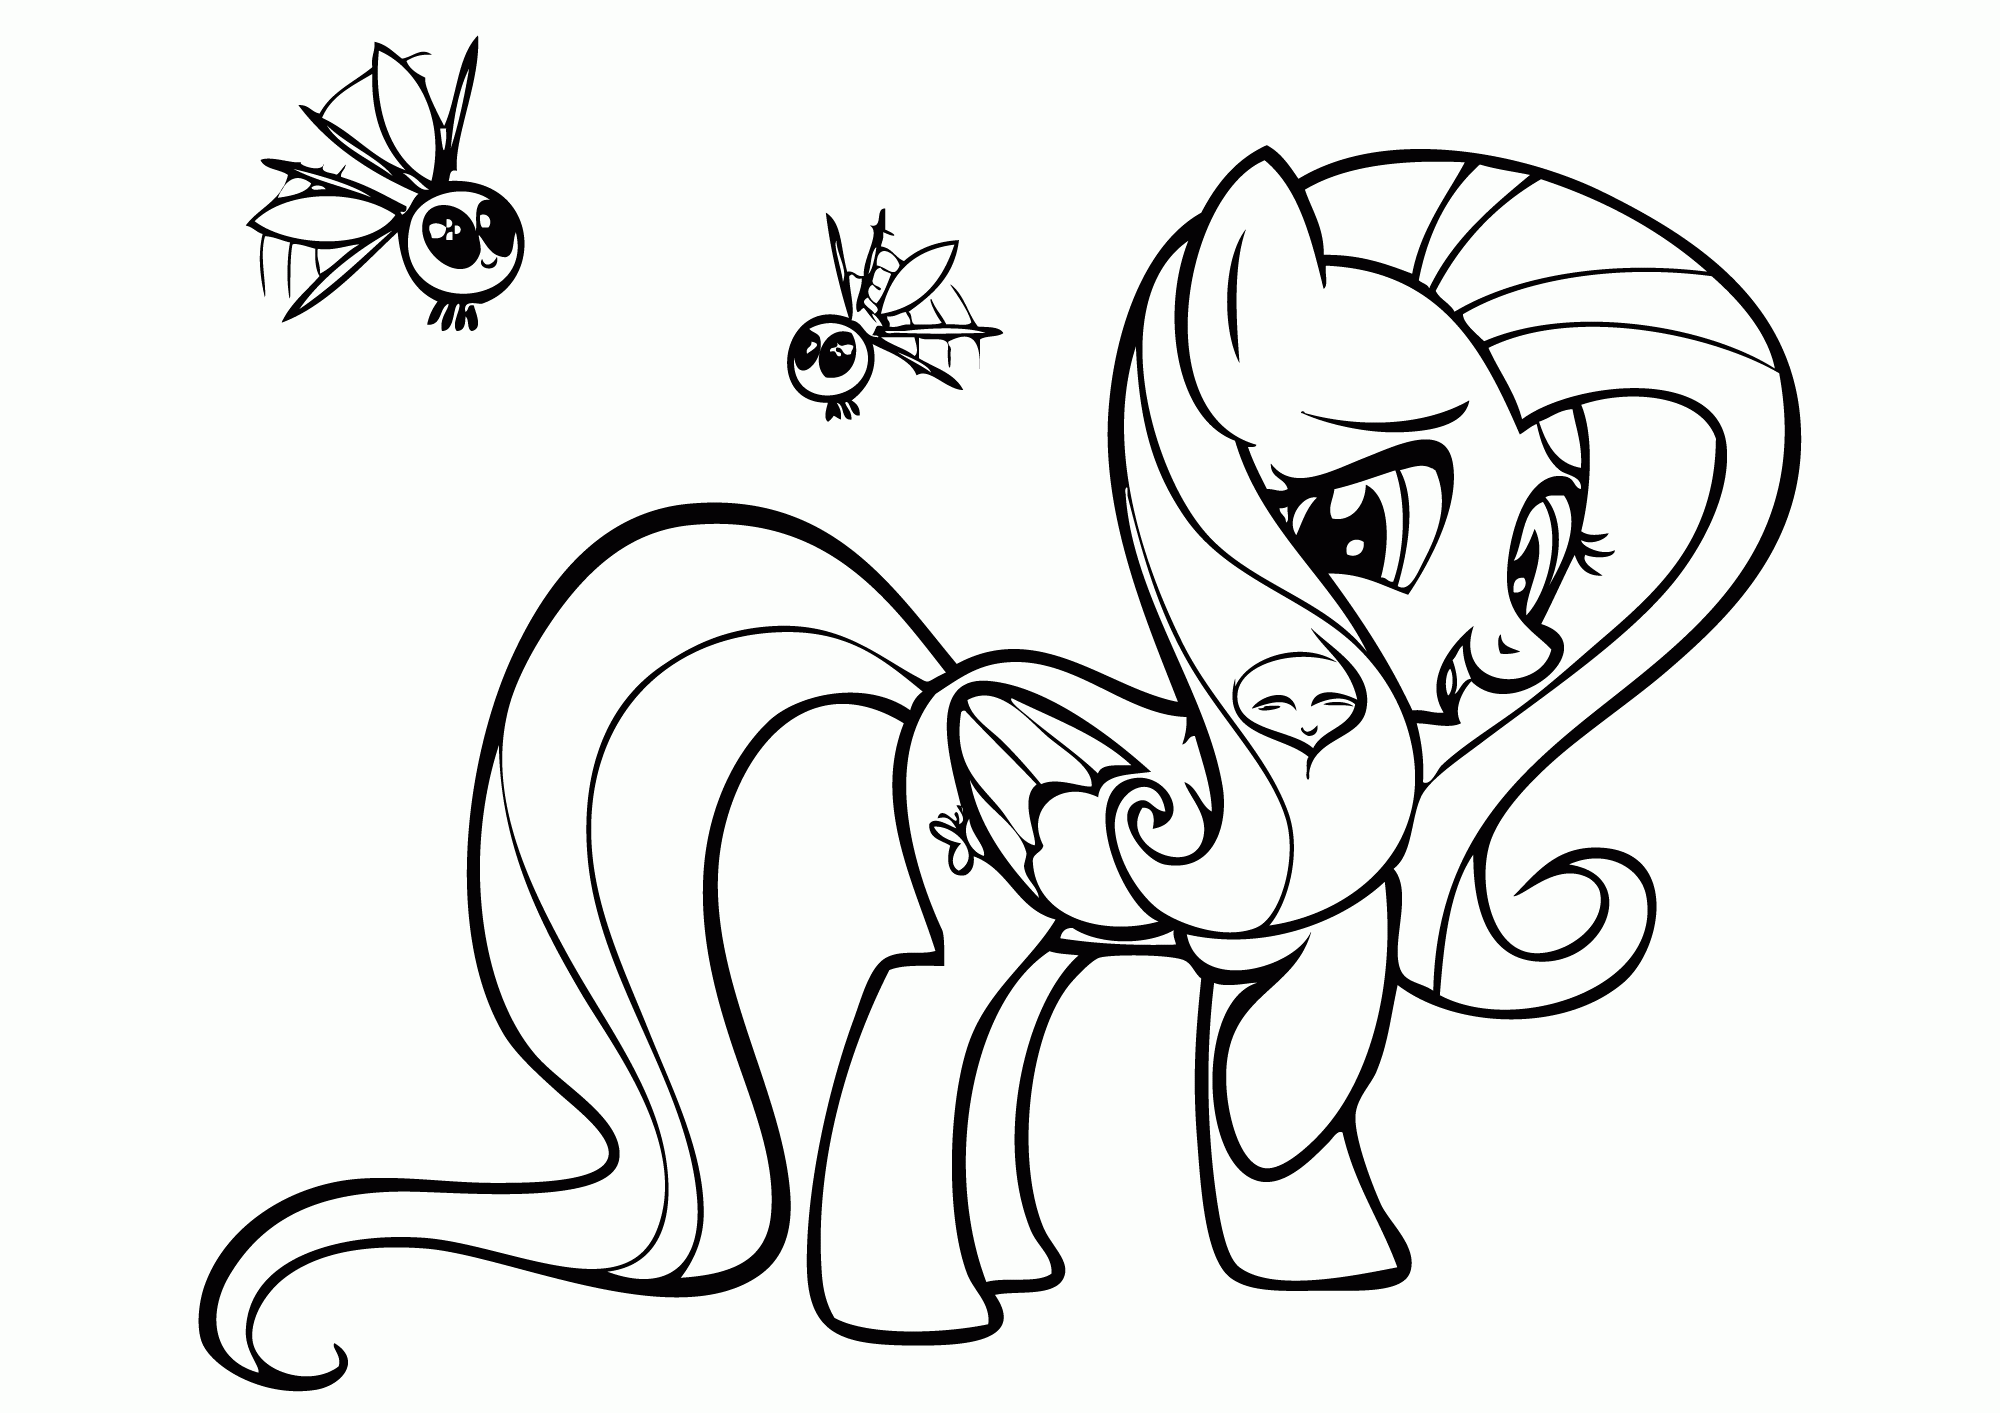 Coloring Pages My Little Pony Fluttershy - Coloring